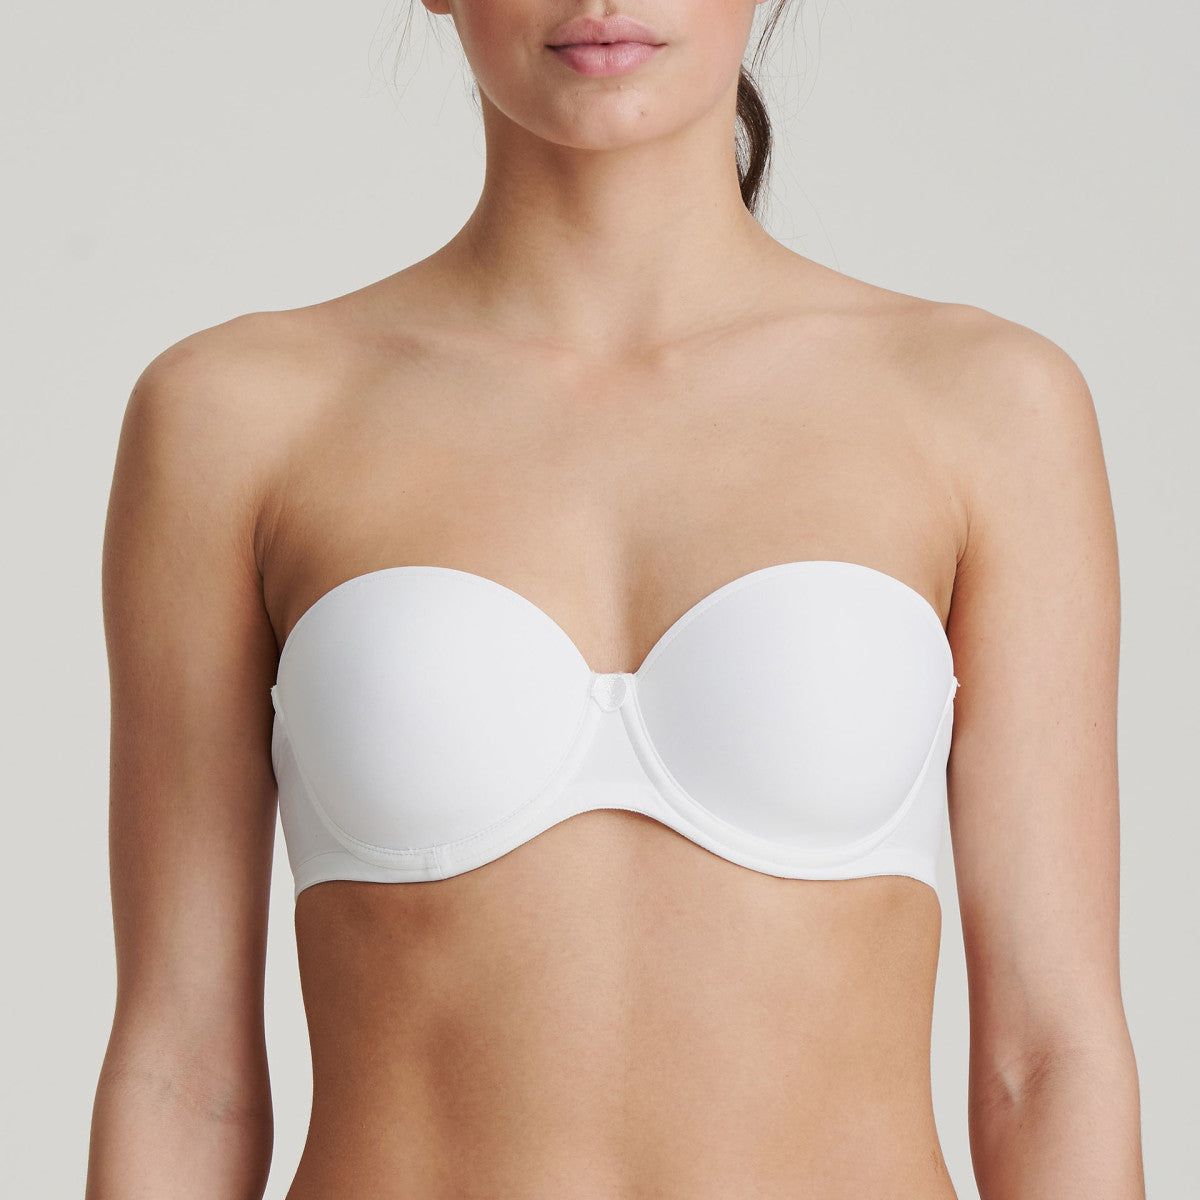 HANRO Padded Bandeau Bra in off white